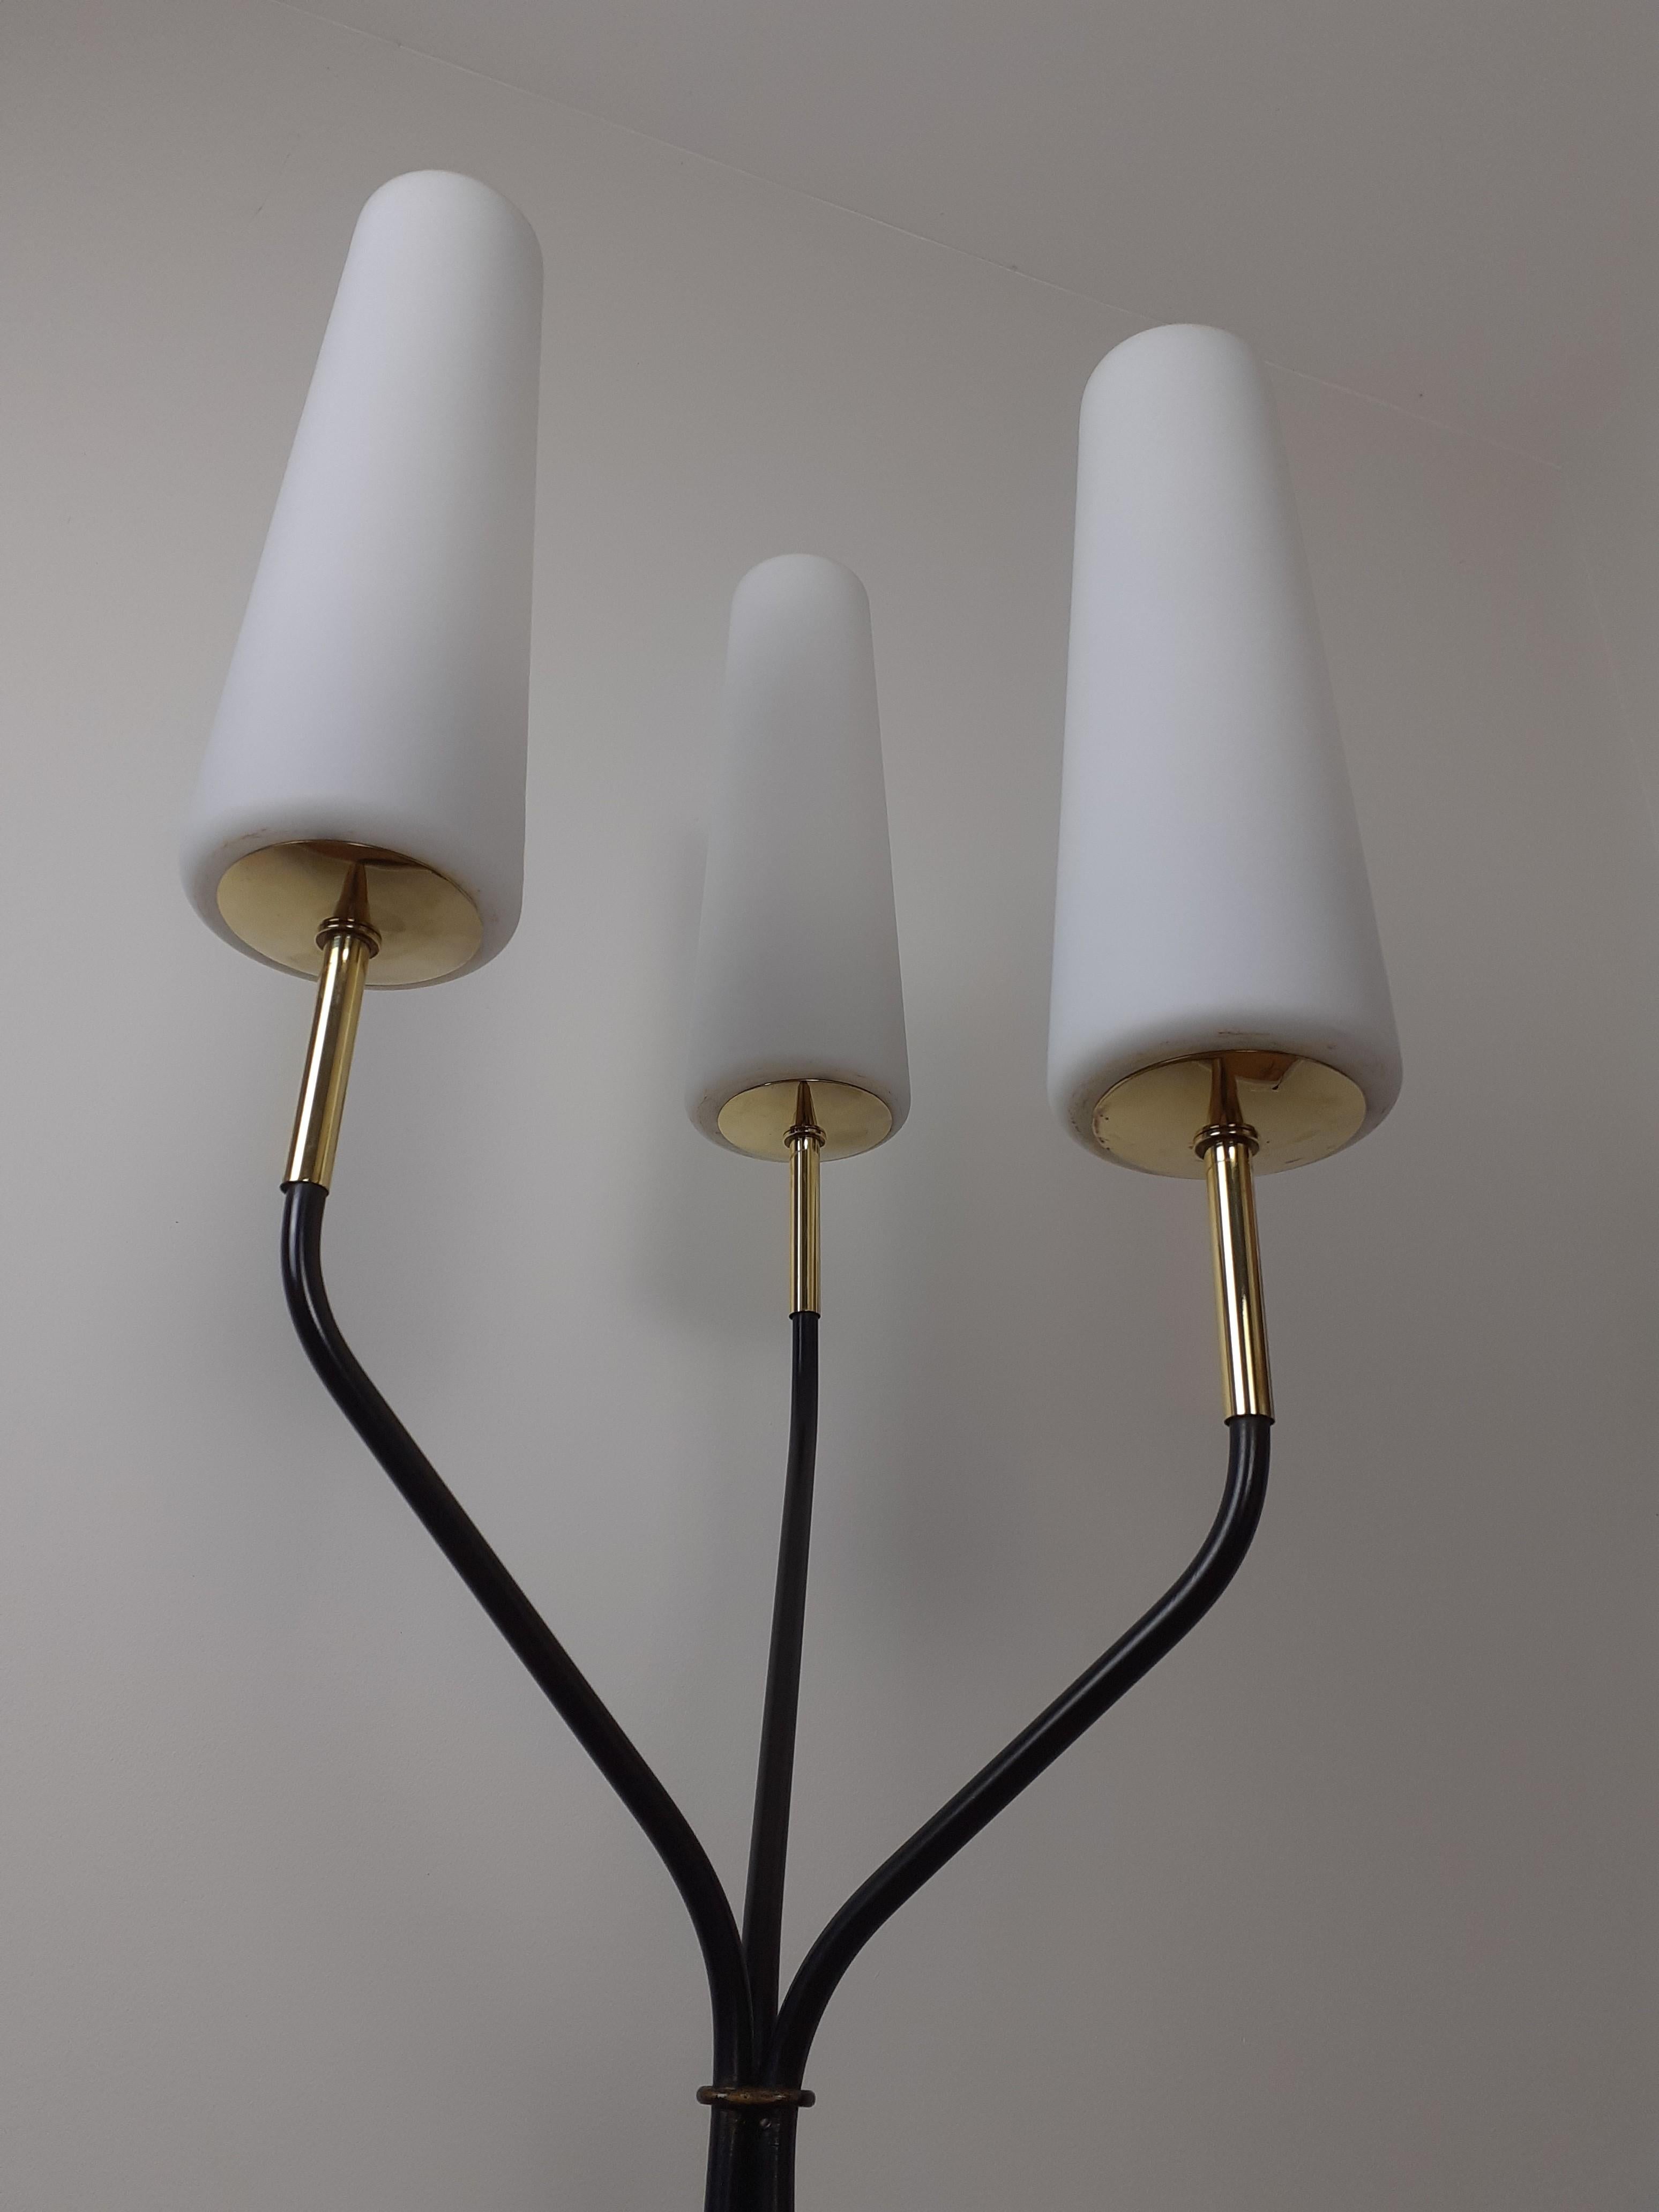 Floor Lamp with 3 Sconces, Lunel House, circa 1950 1